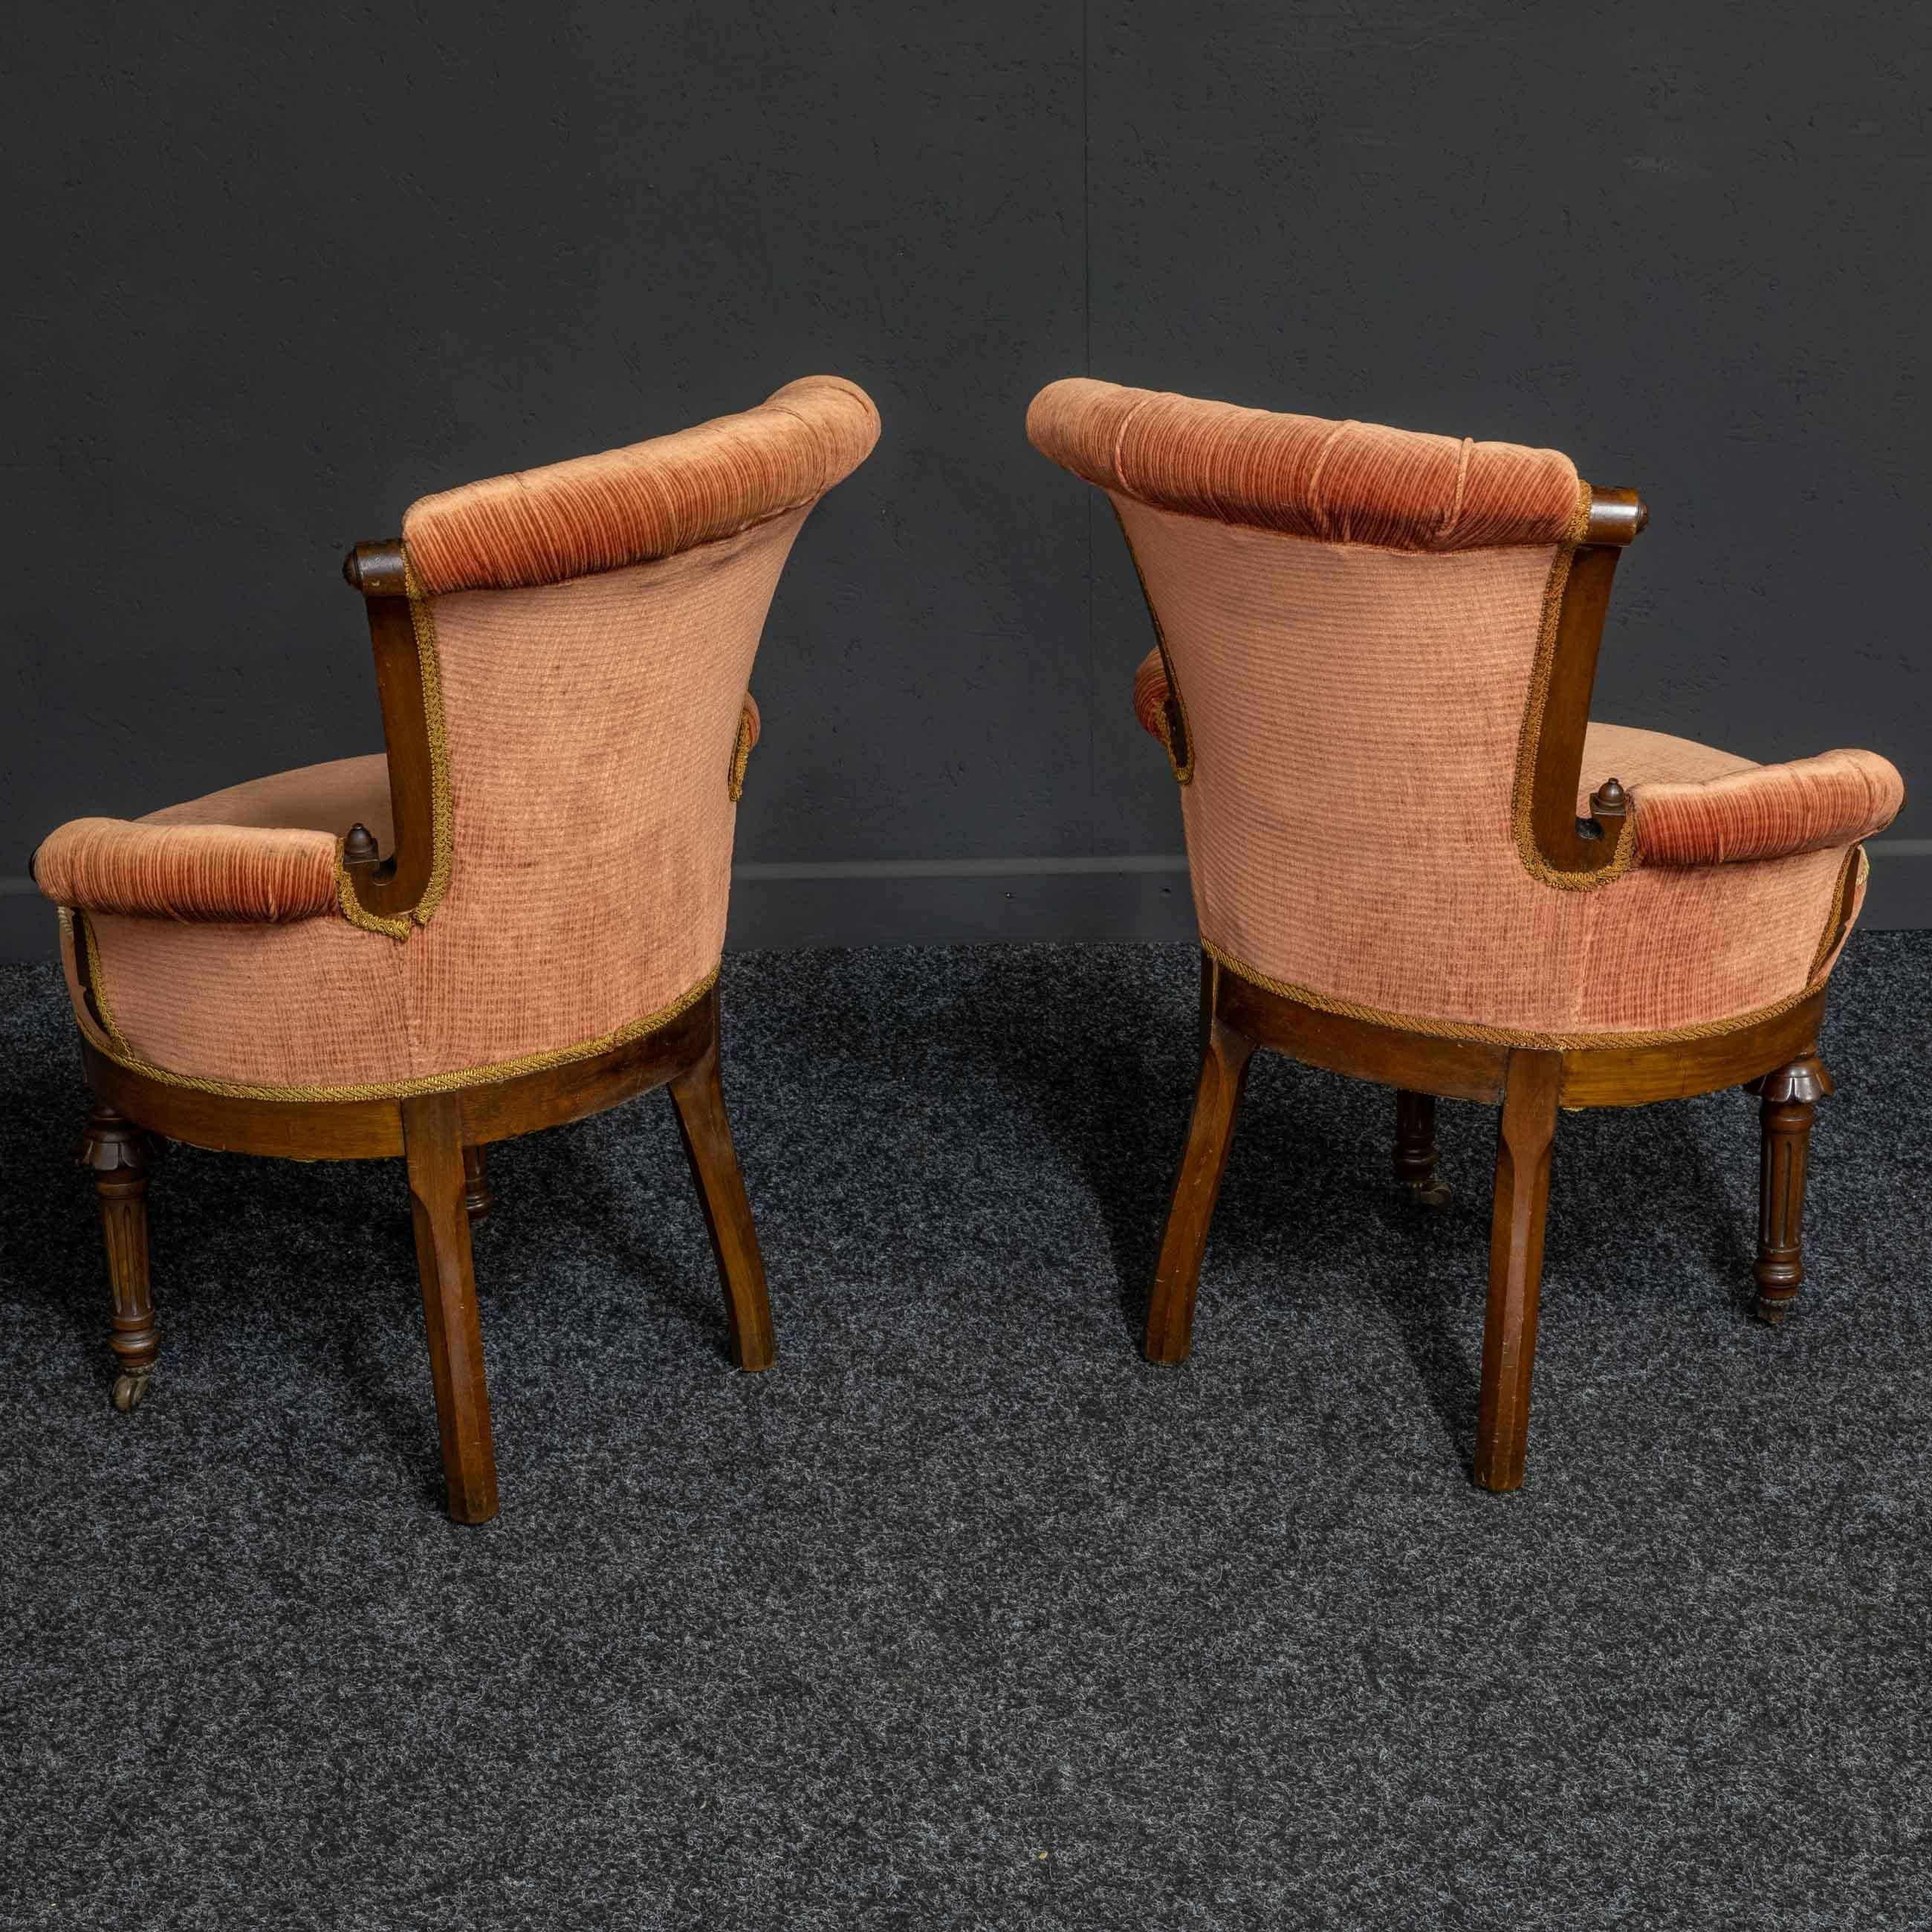 A pair of Victorian boudoir chairs of small proportions. Made from English walnut and remarkably sturdy. The upholstery is probably from the 1970s and is in very good order for it's age and still serviceable. The chairs are round in shape with a